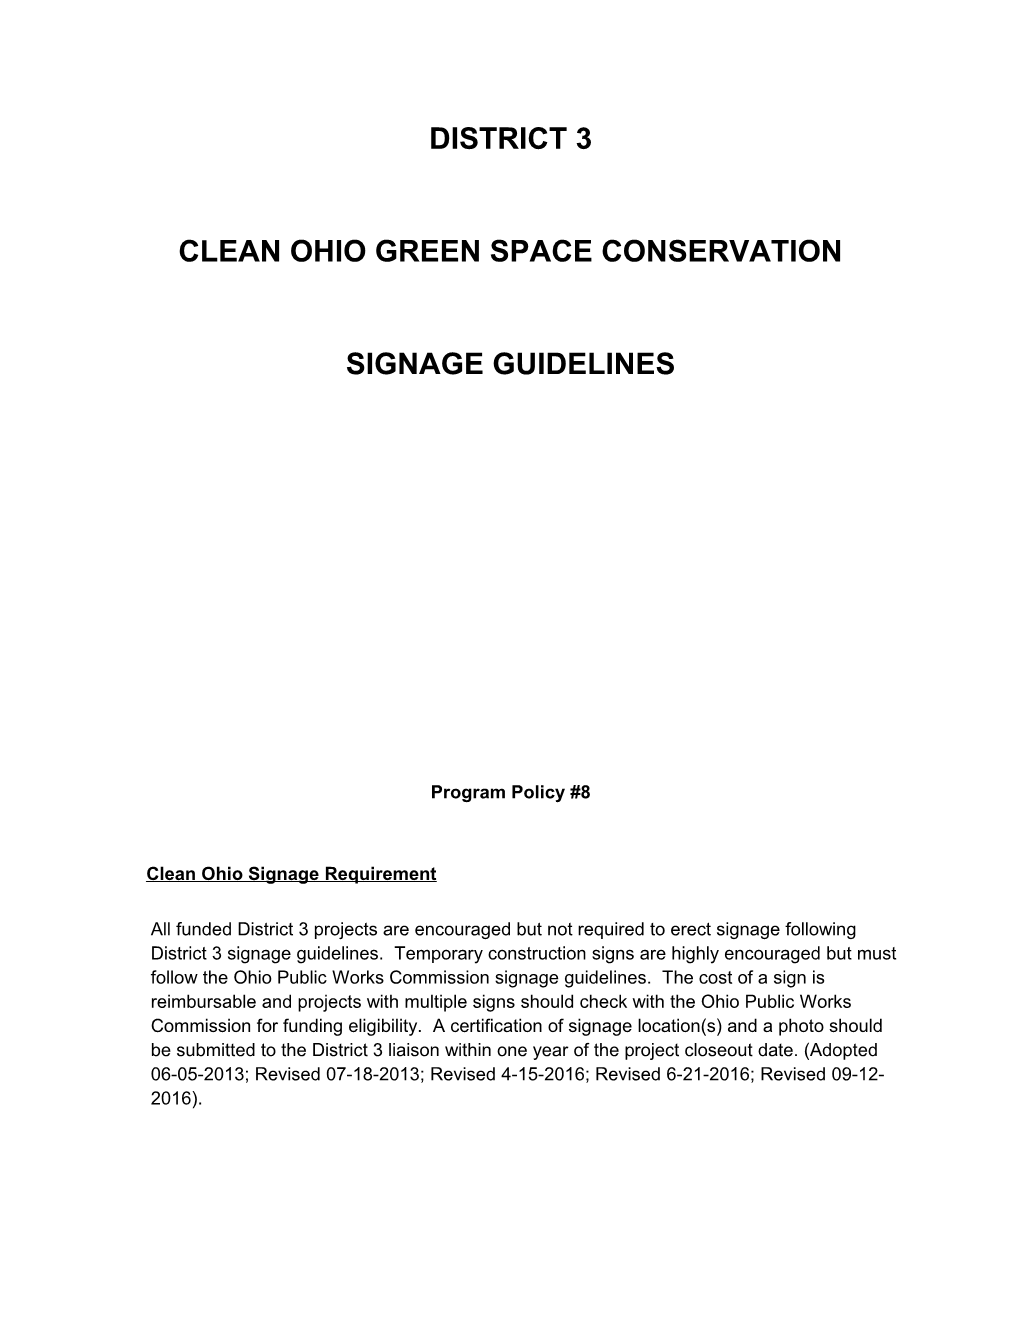 Clean Ohio Green Space Conservation